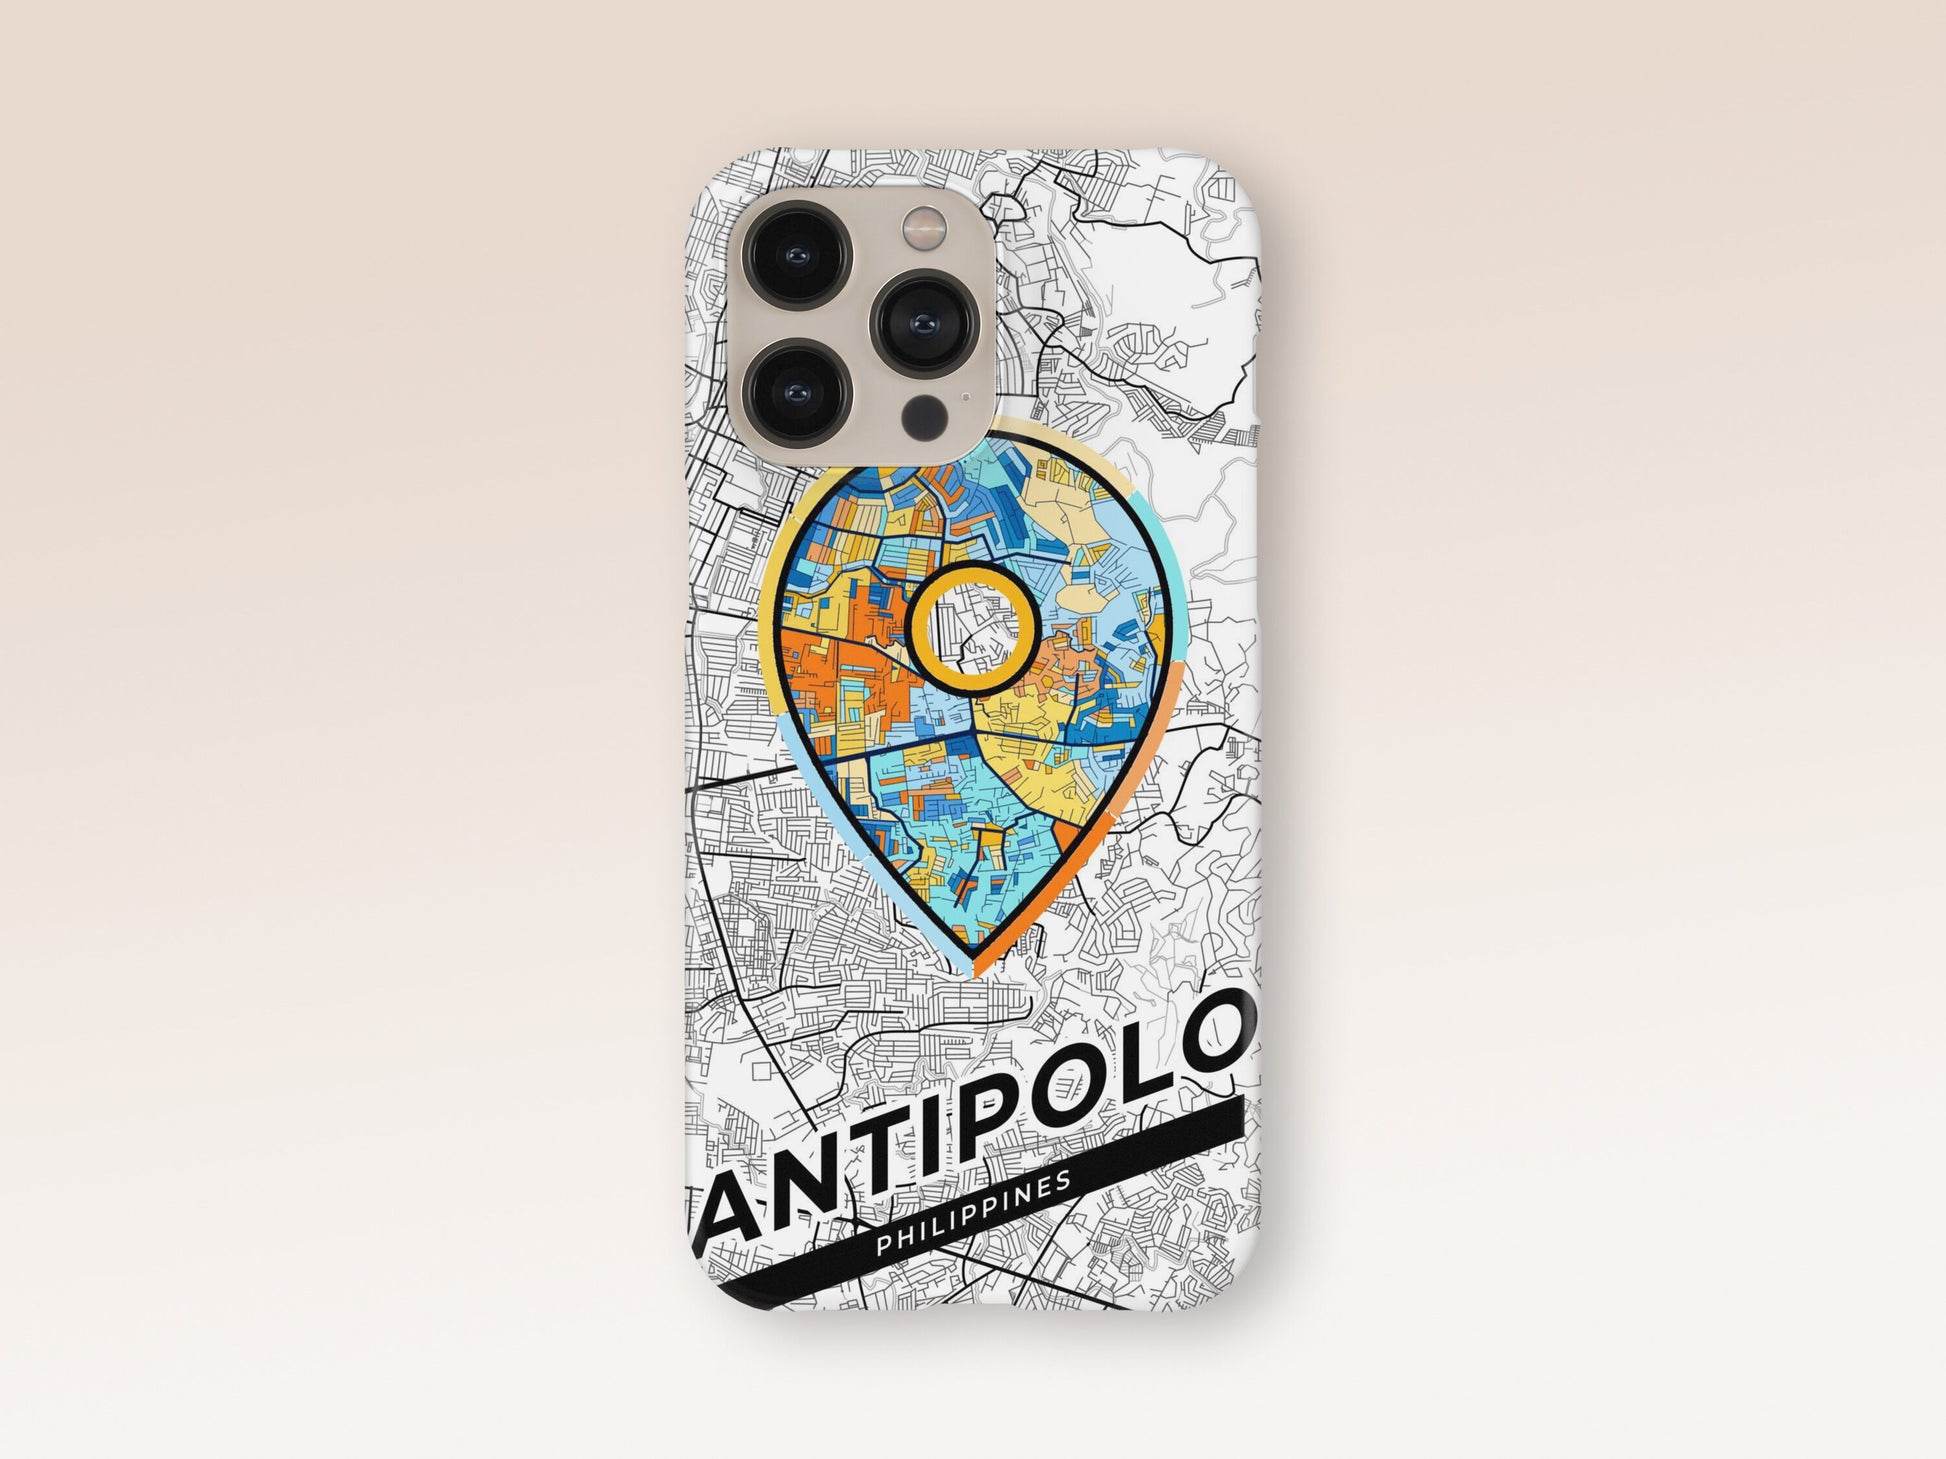 Antipolo Philippines slim phone case with colorful icon. Birthday, wedding or housewarming gift. Couple match cases. 1